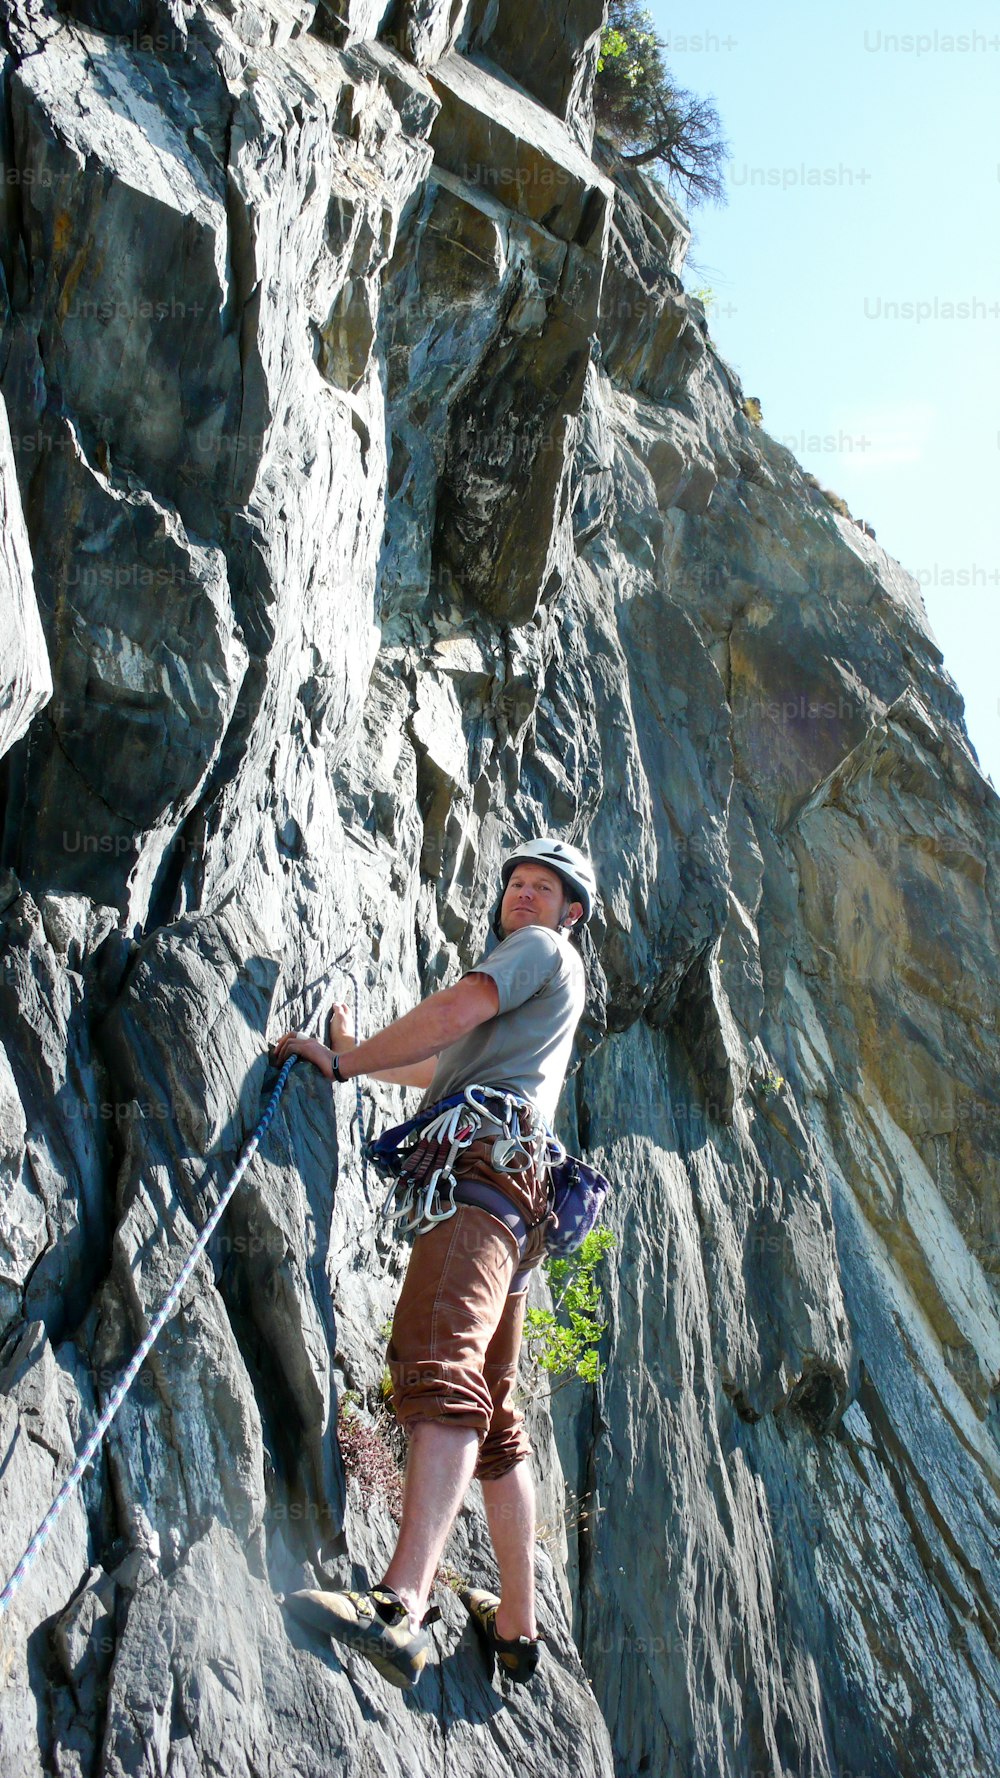 A mountain guide rock climber on a slab limestone climbing route in the Alps of Switzerland on a beautiful day